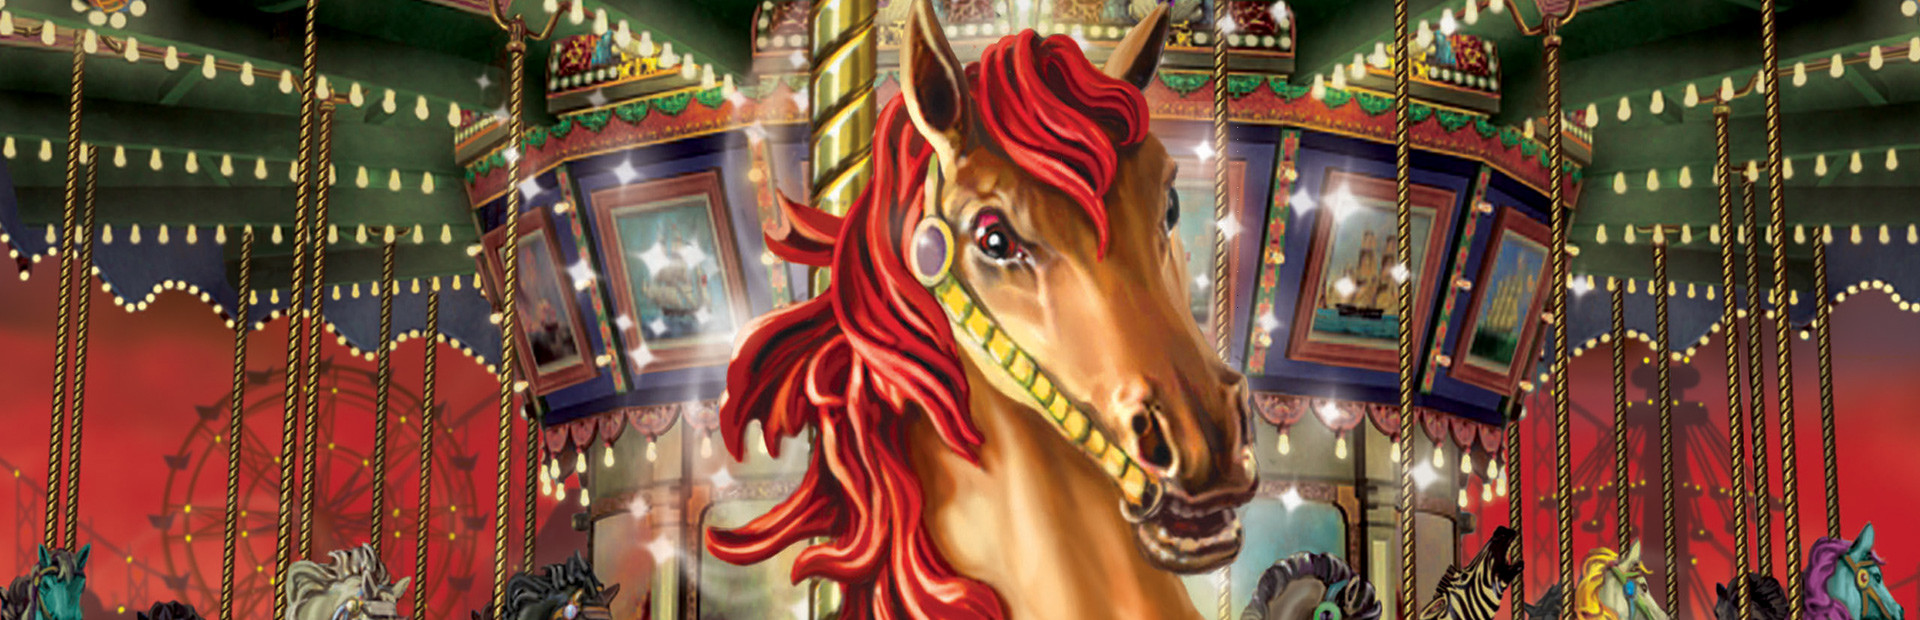 Nancy Drew®: The Haunted Carousel cover image